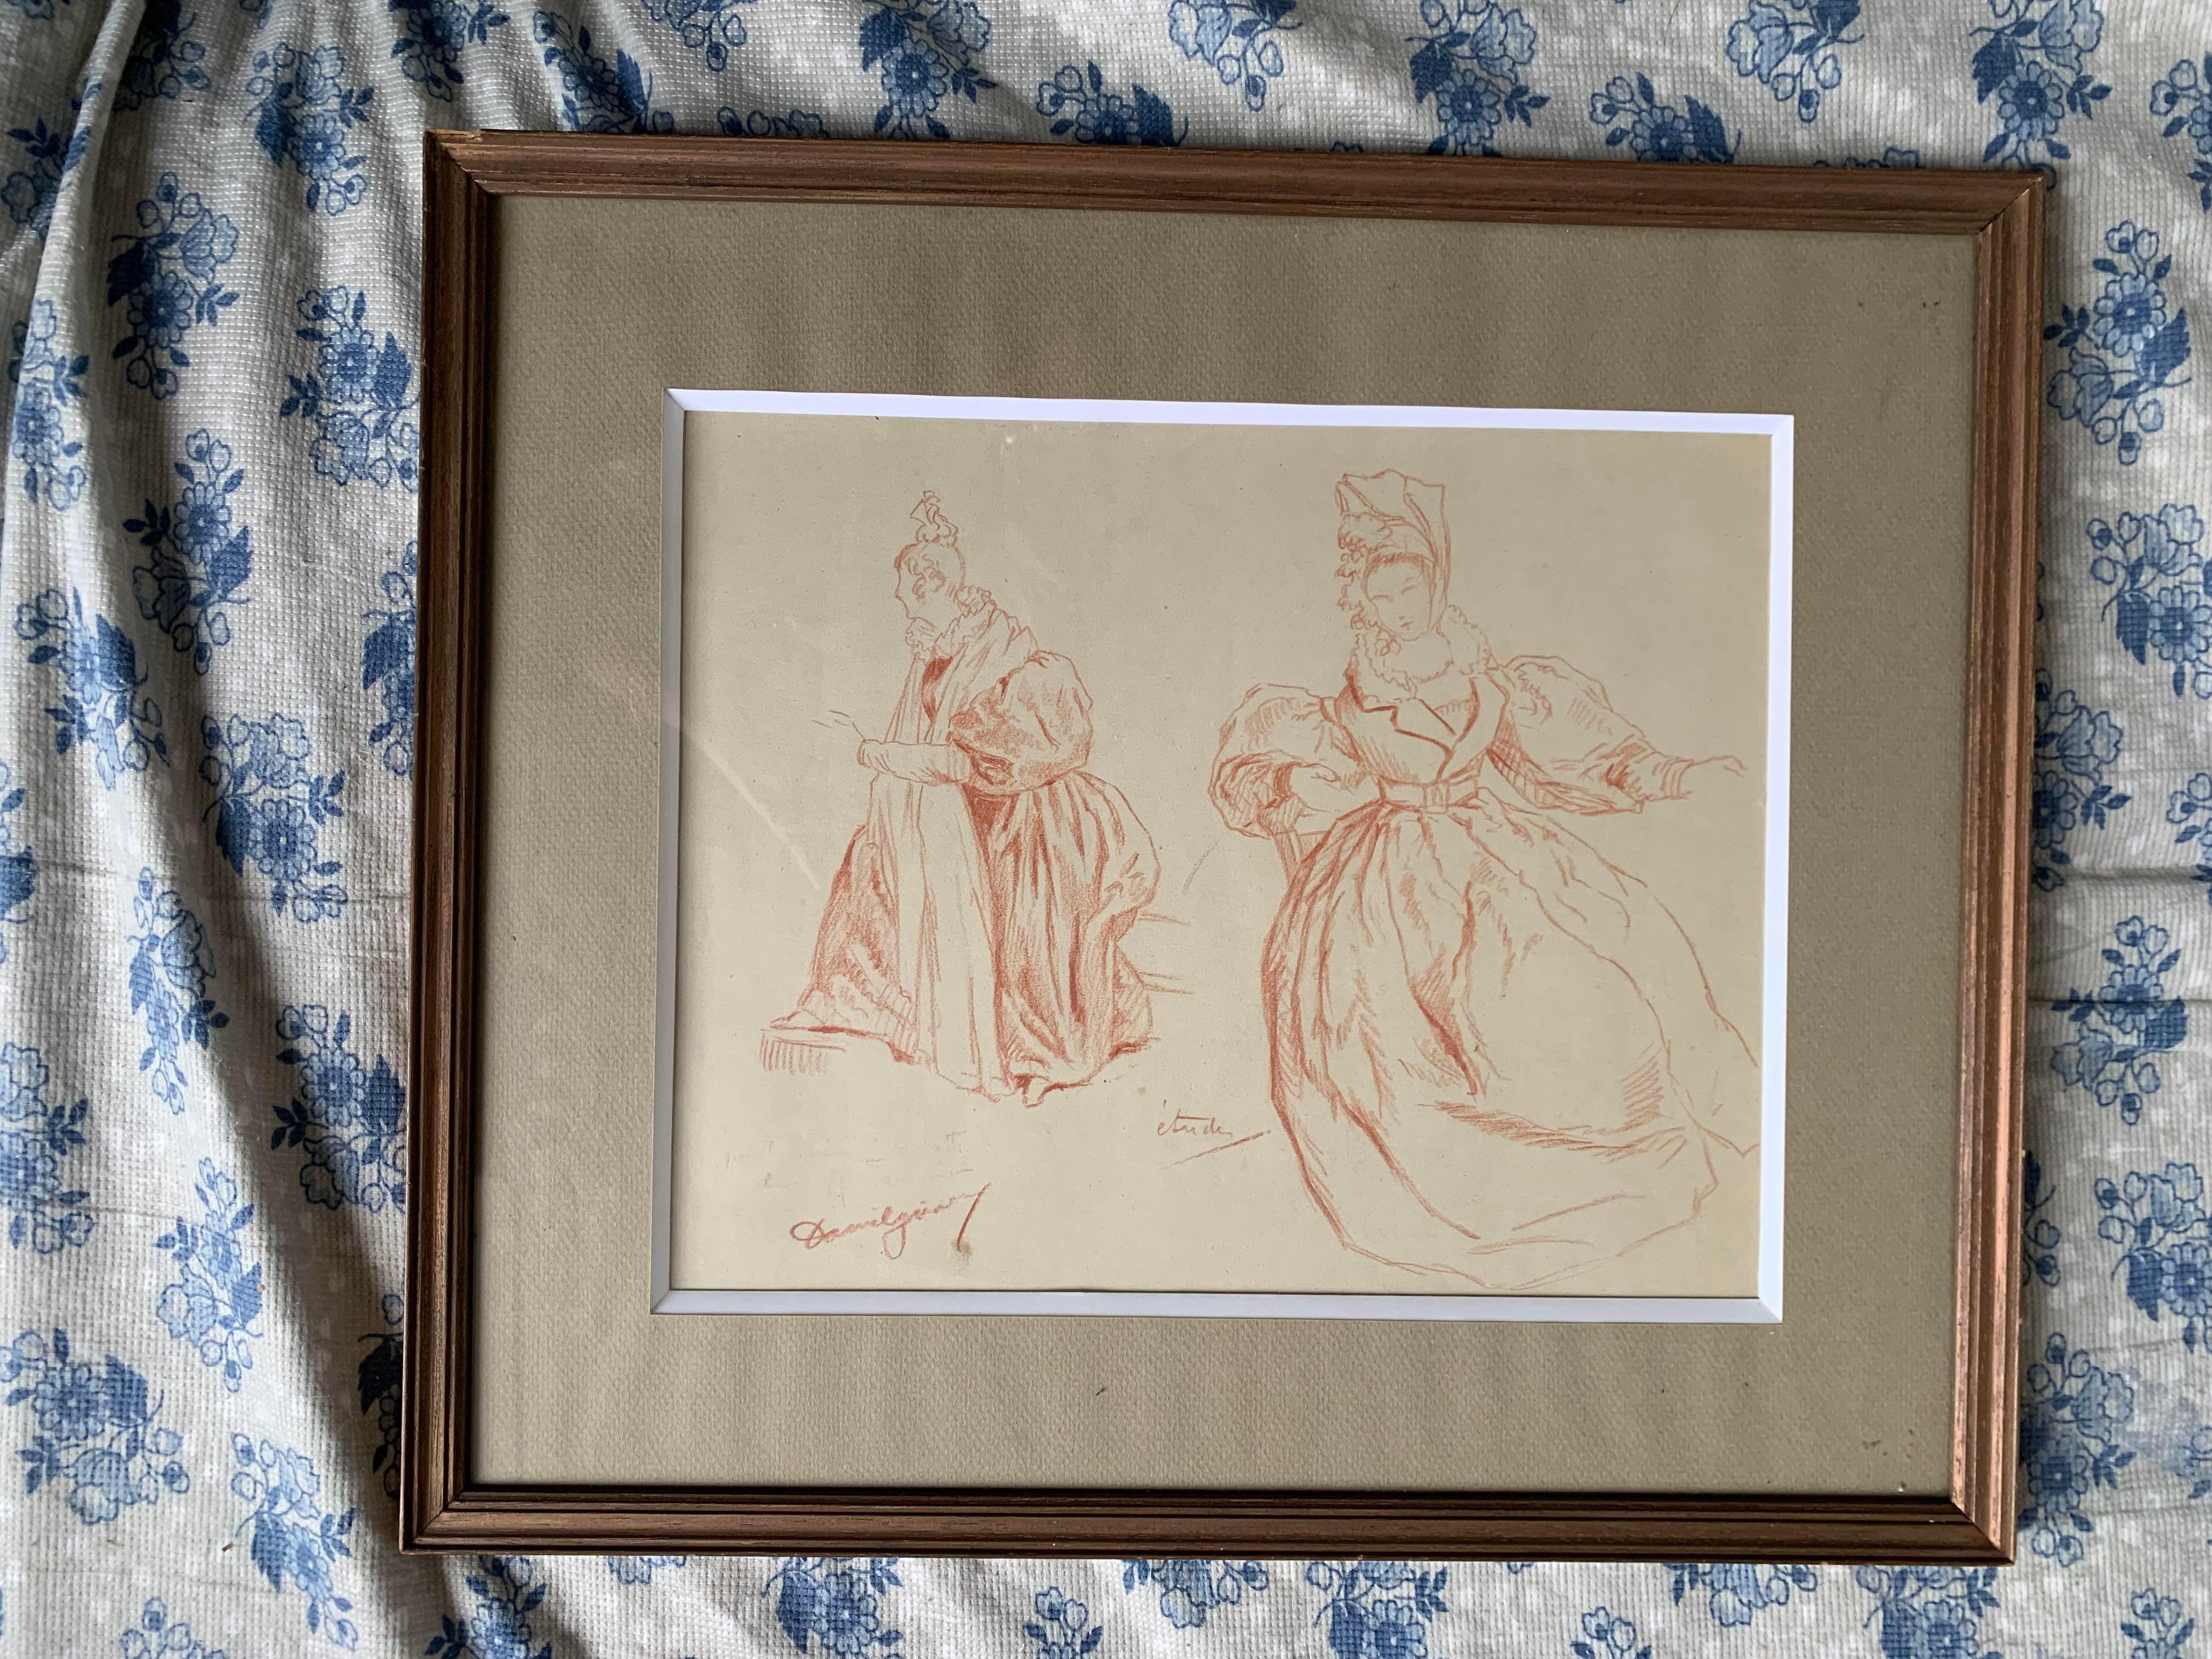 Charming set of three mid 20th century red chalk drawings. The first is a study of two women, the one on the left is in profile ¾ turned, sitting in a chair, wearing a long dress with a bun. The one on the right is also seated in profile facing